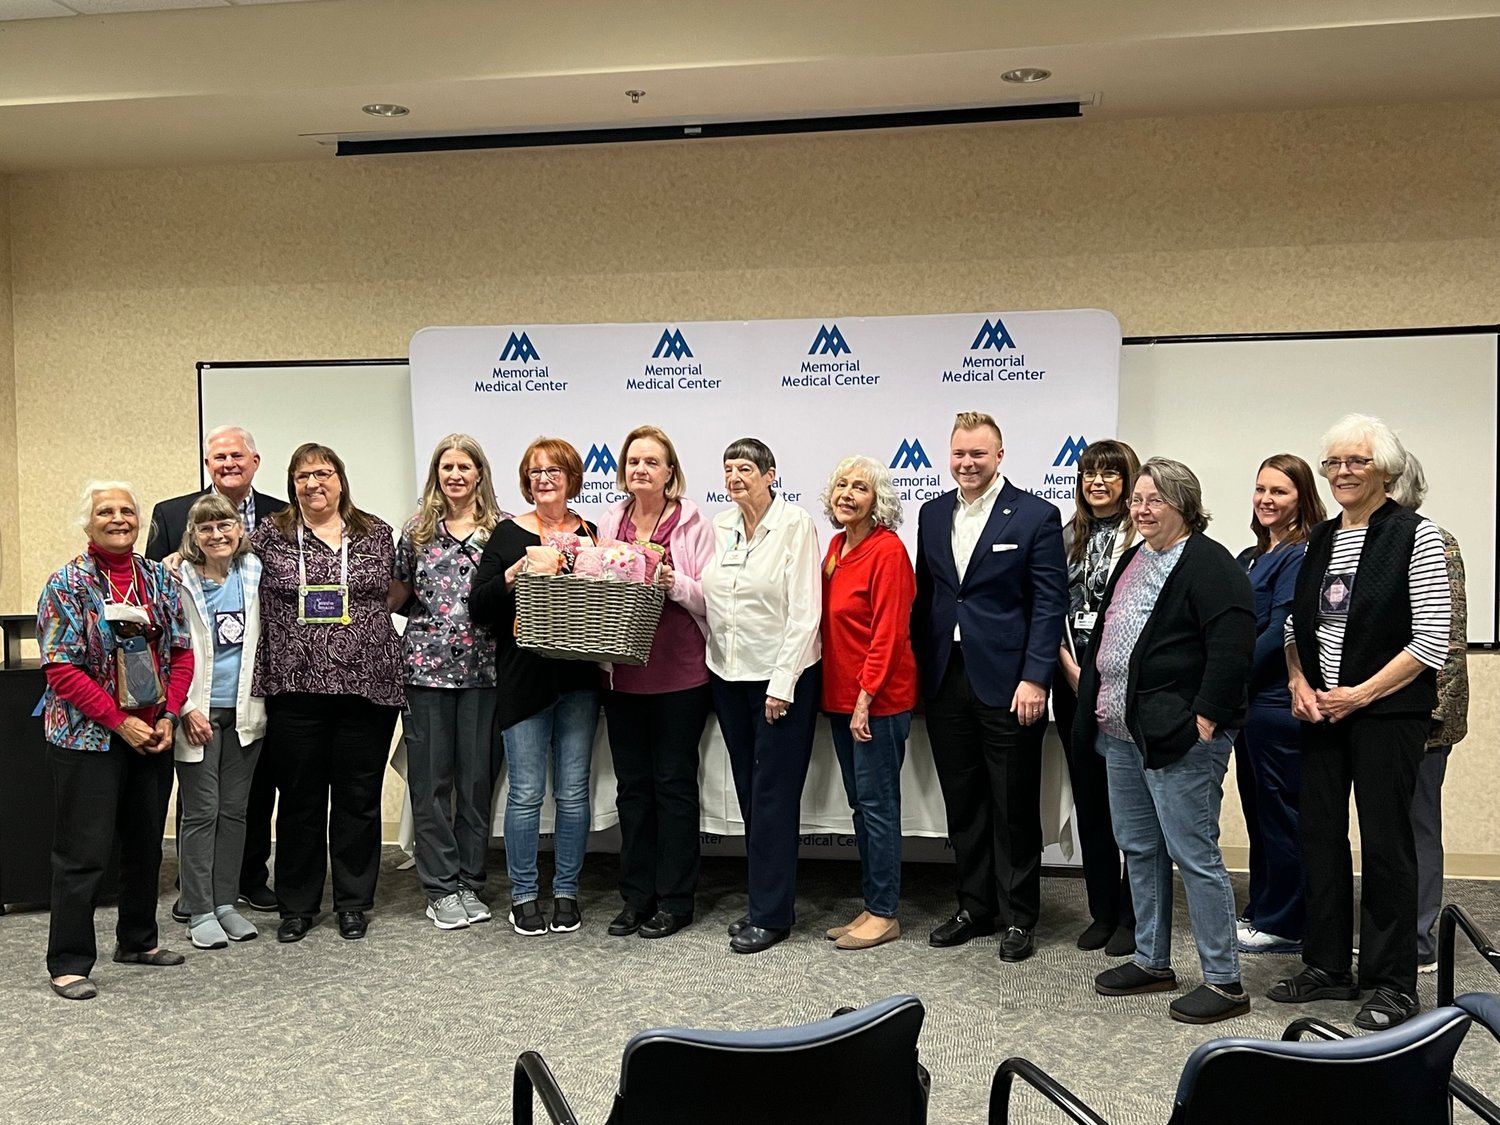 Members of Las Colcheras Quilt Guild along with staff and management at Memorial Medical Center gather for the presentation of 200 pillows for breast cancer patients at the hospital’s cancer center.